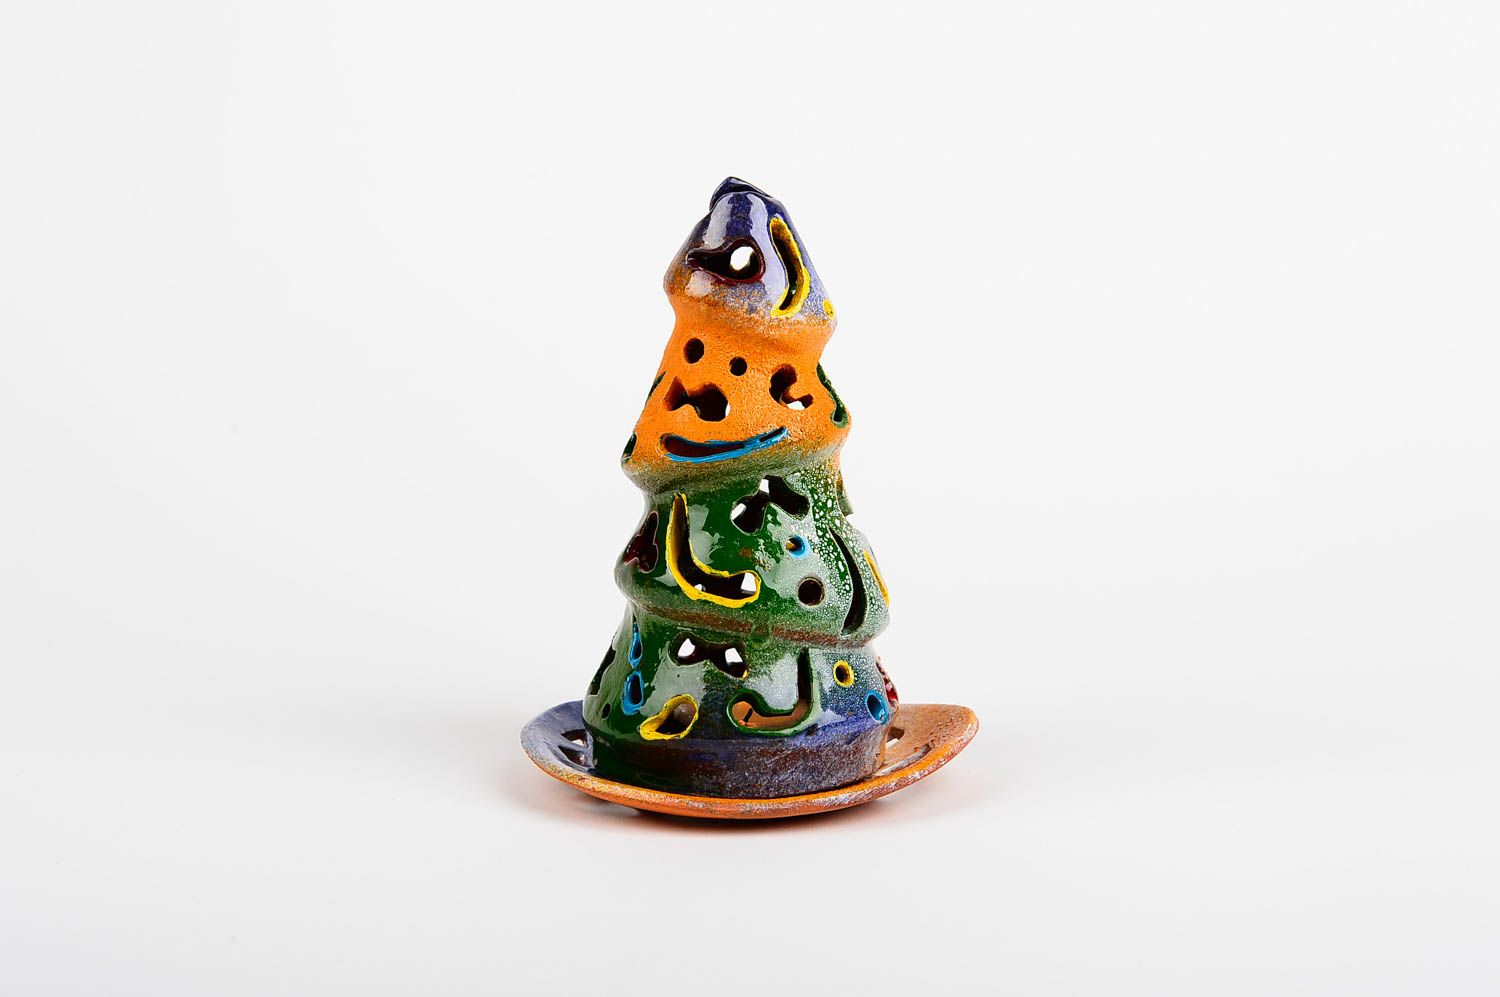 Tealight ceramic light-glow Christmas tree multi-color candle holder 5,9 inches, 0,43 lb photo 1